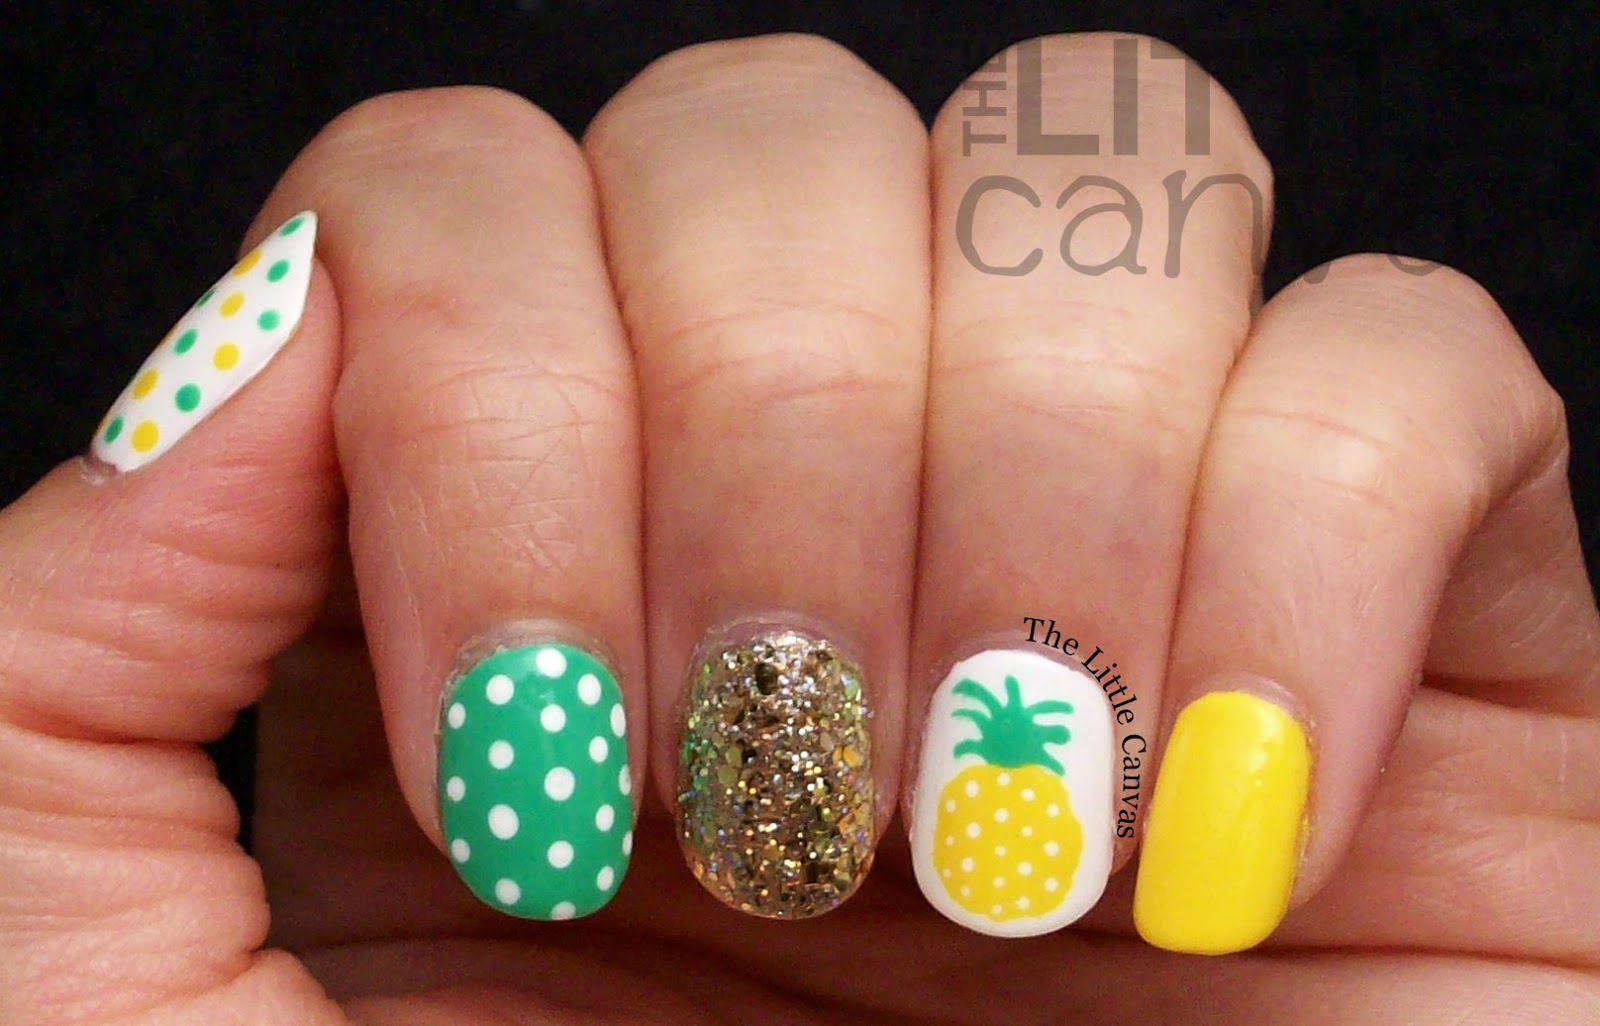 2. Tropical Nail Designs - wide 7